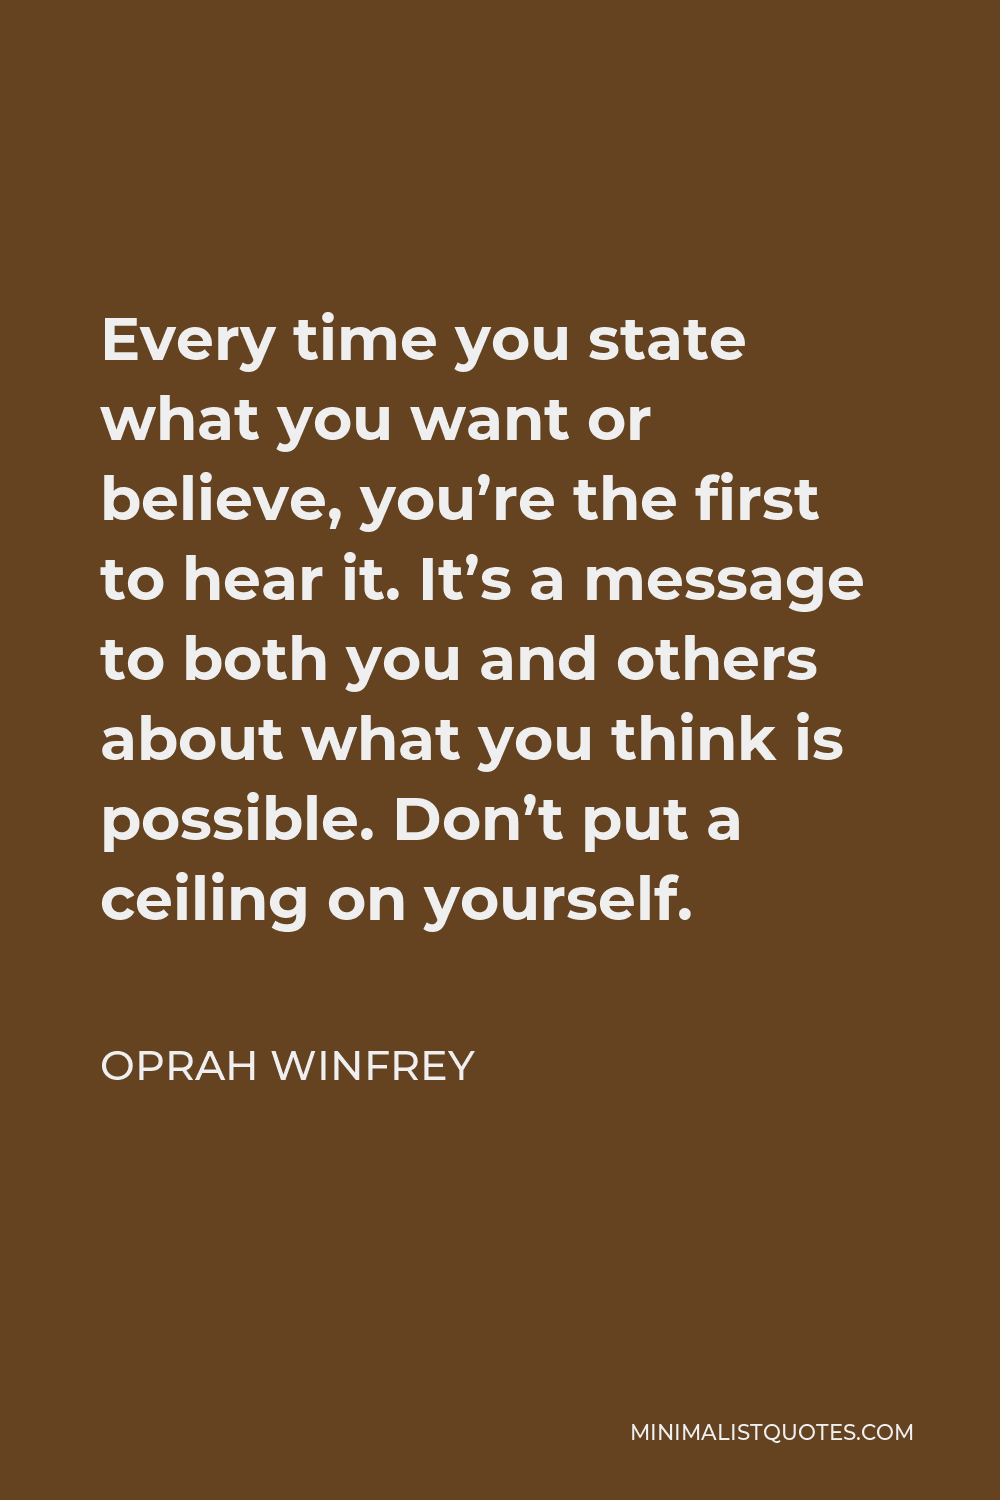 Oprah Winfrey Quote - Every time you state what you want or believe, you’re the first to hear it. It’s a message to both you and others about what you think is possible. Don’t put a ceiling on yourself.